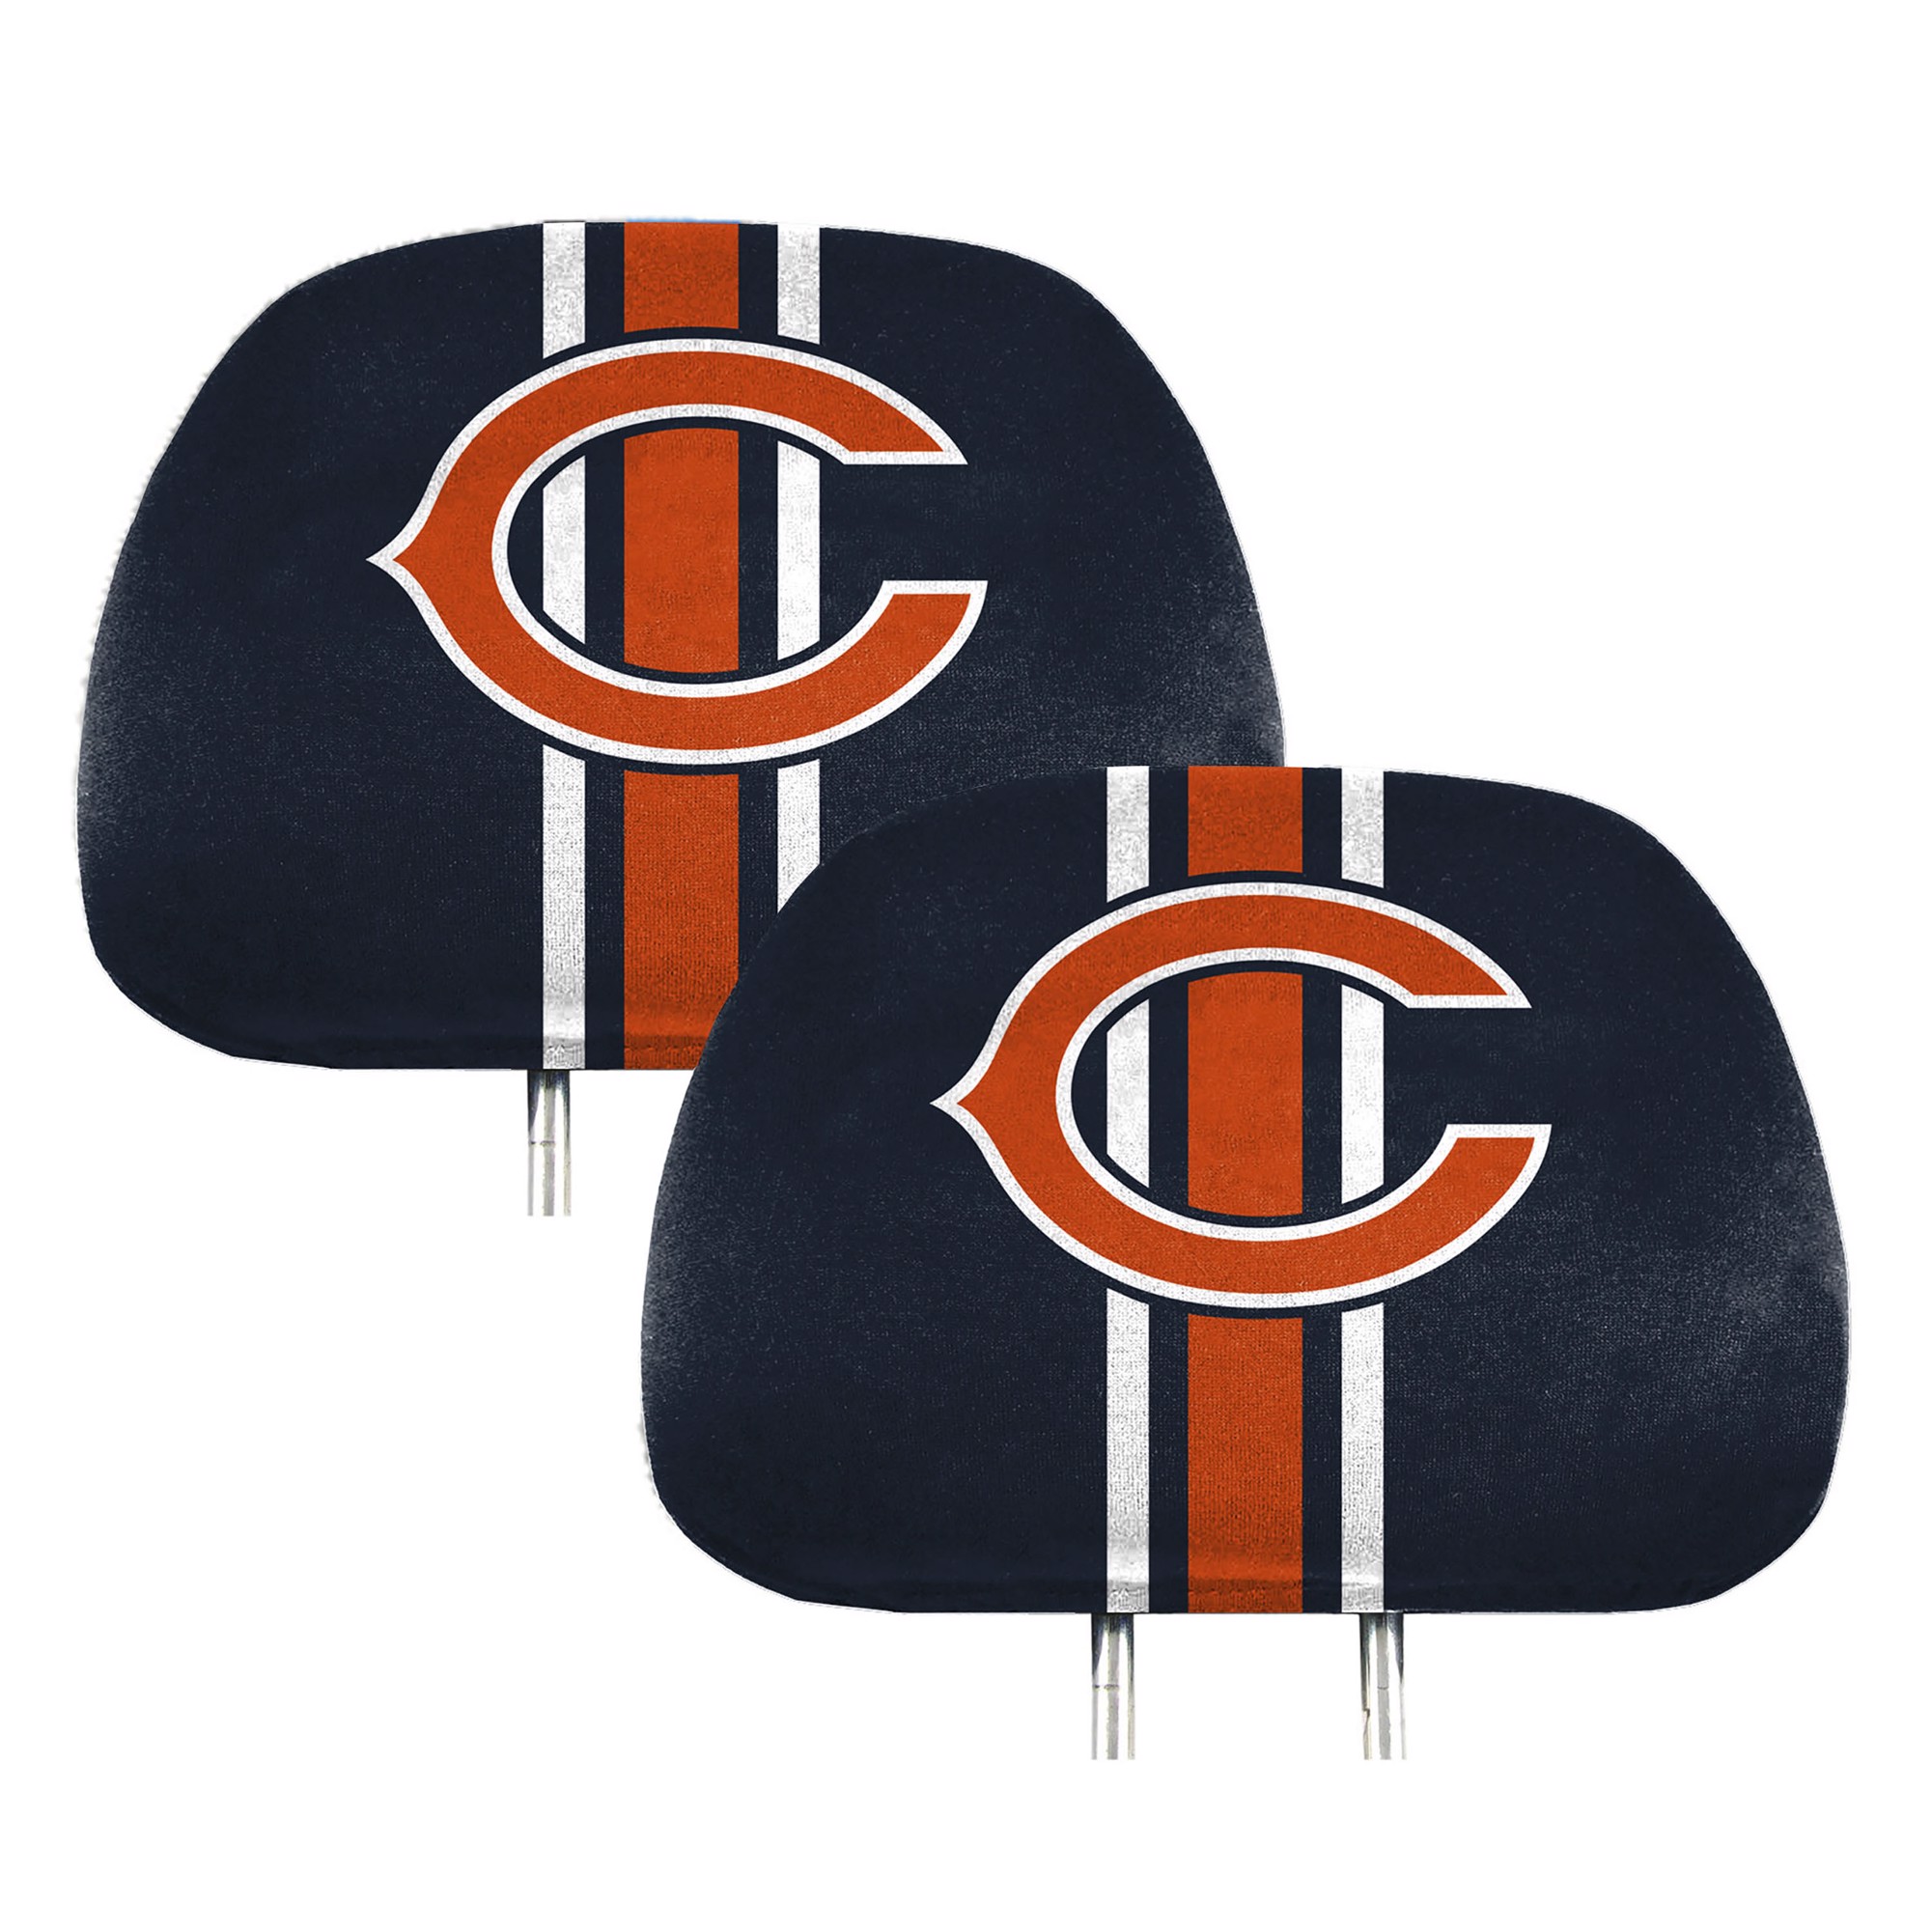 Chicago Bears Printed Headrest Cover